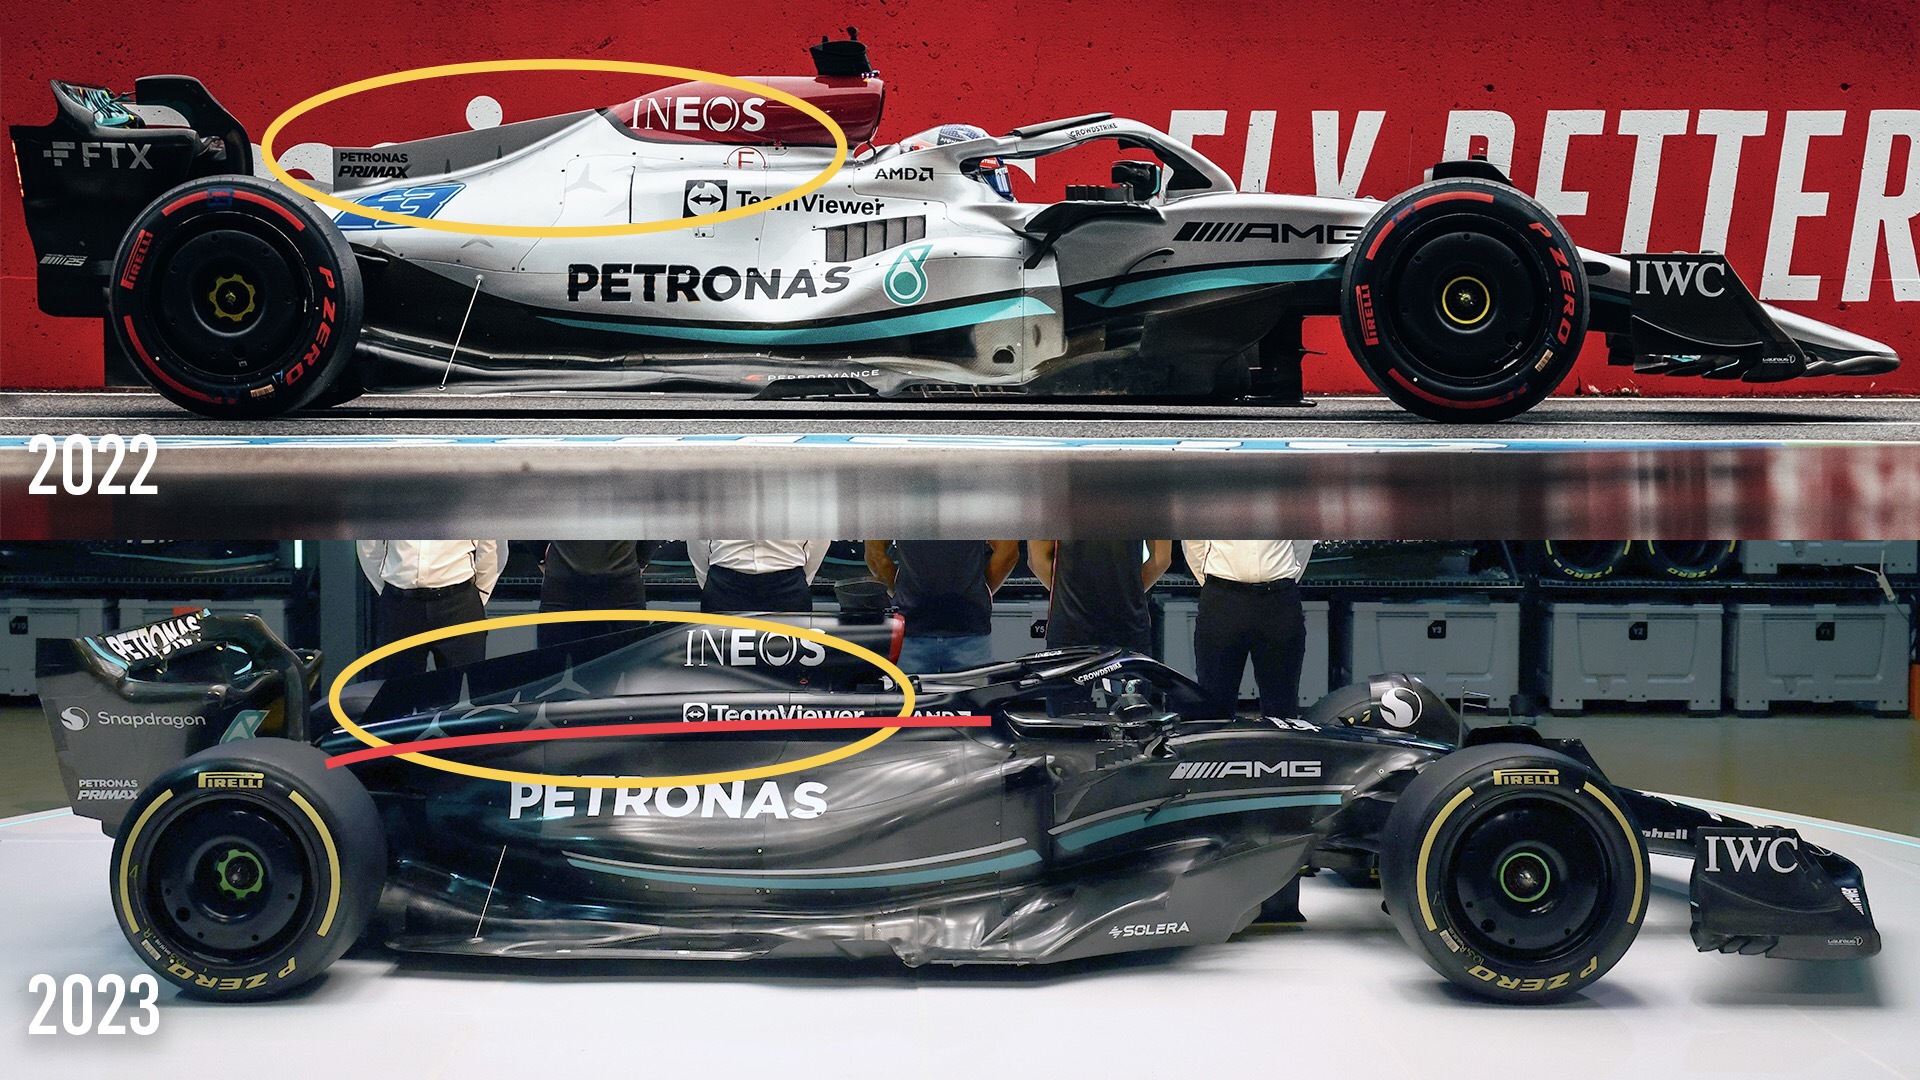 Gary Anderson The course corrections in Mercedes’ F1 2023 design The Race